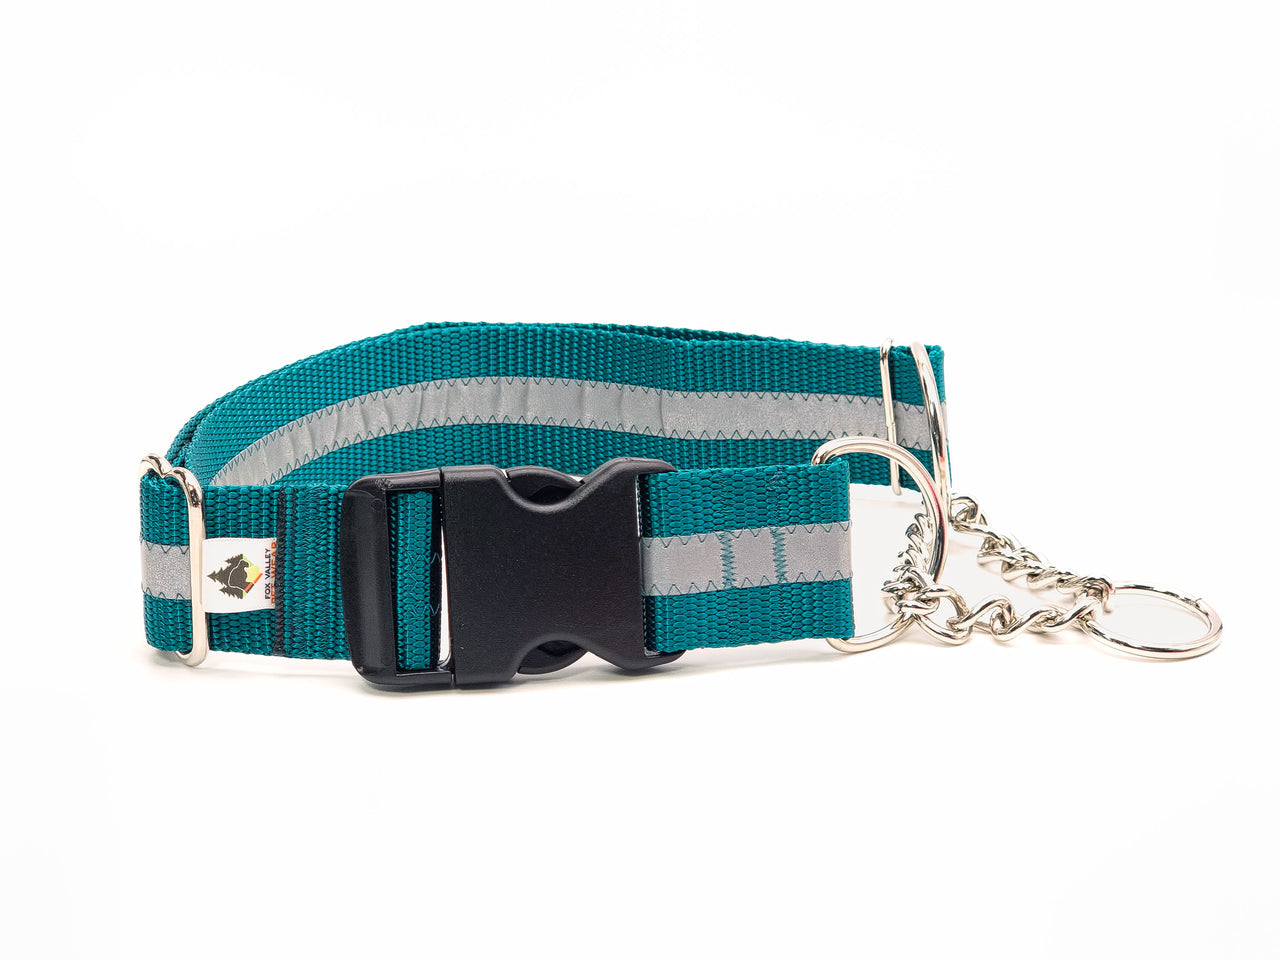 Chain Martingale | Quick clip buckle | XL reflective in 1.5" wide